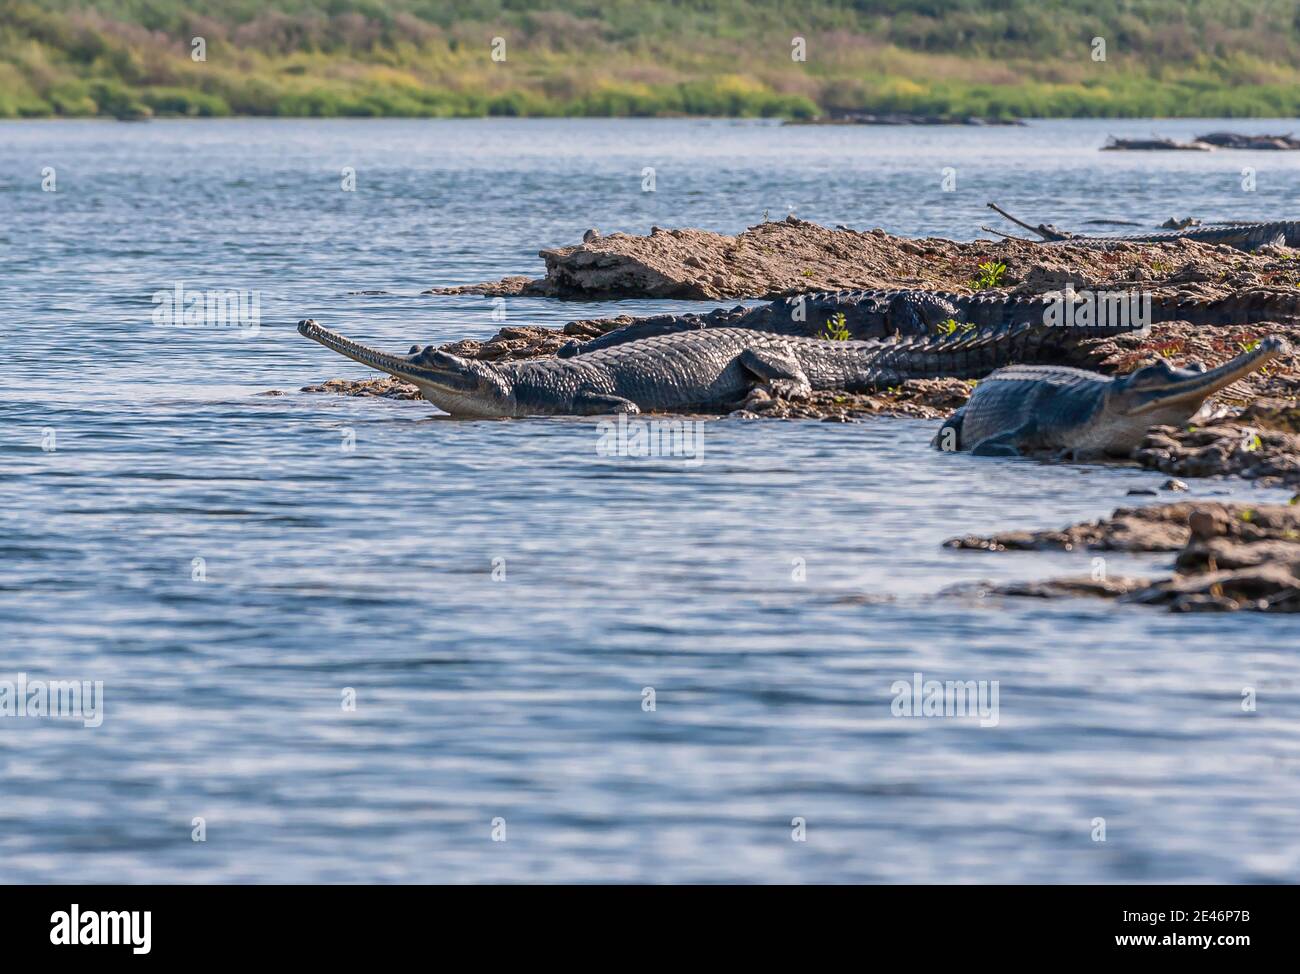 Agra, Uttar Pradesh, India - February 18, 2011: Chambal river. Gharial crocodiles looking out over blue river from their brown dirt island. Green vege Stock Photo